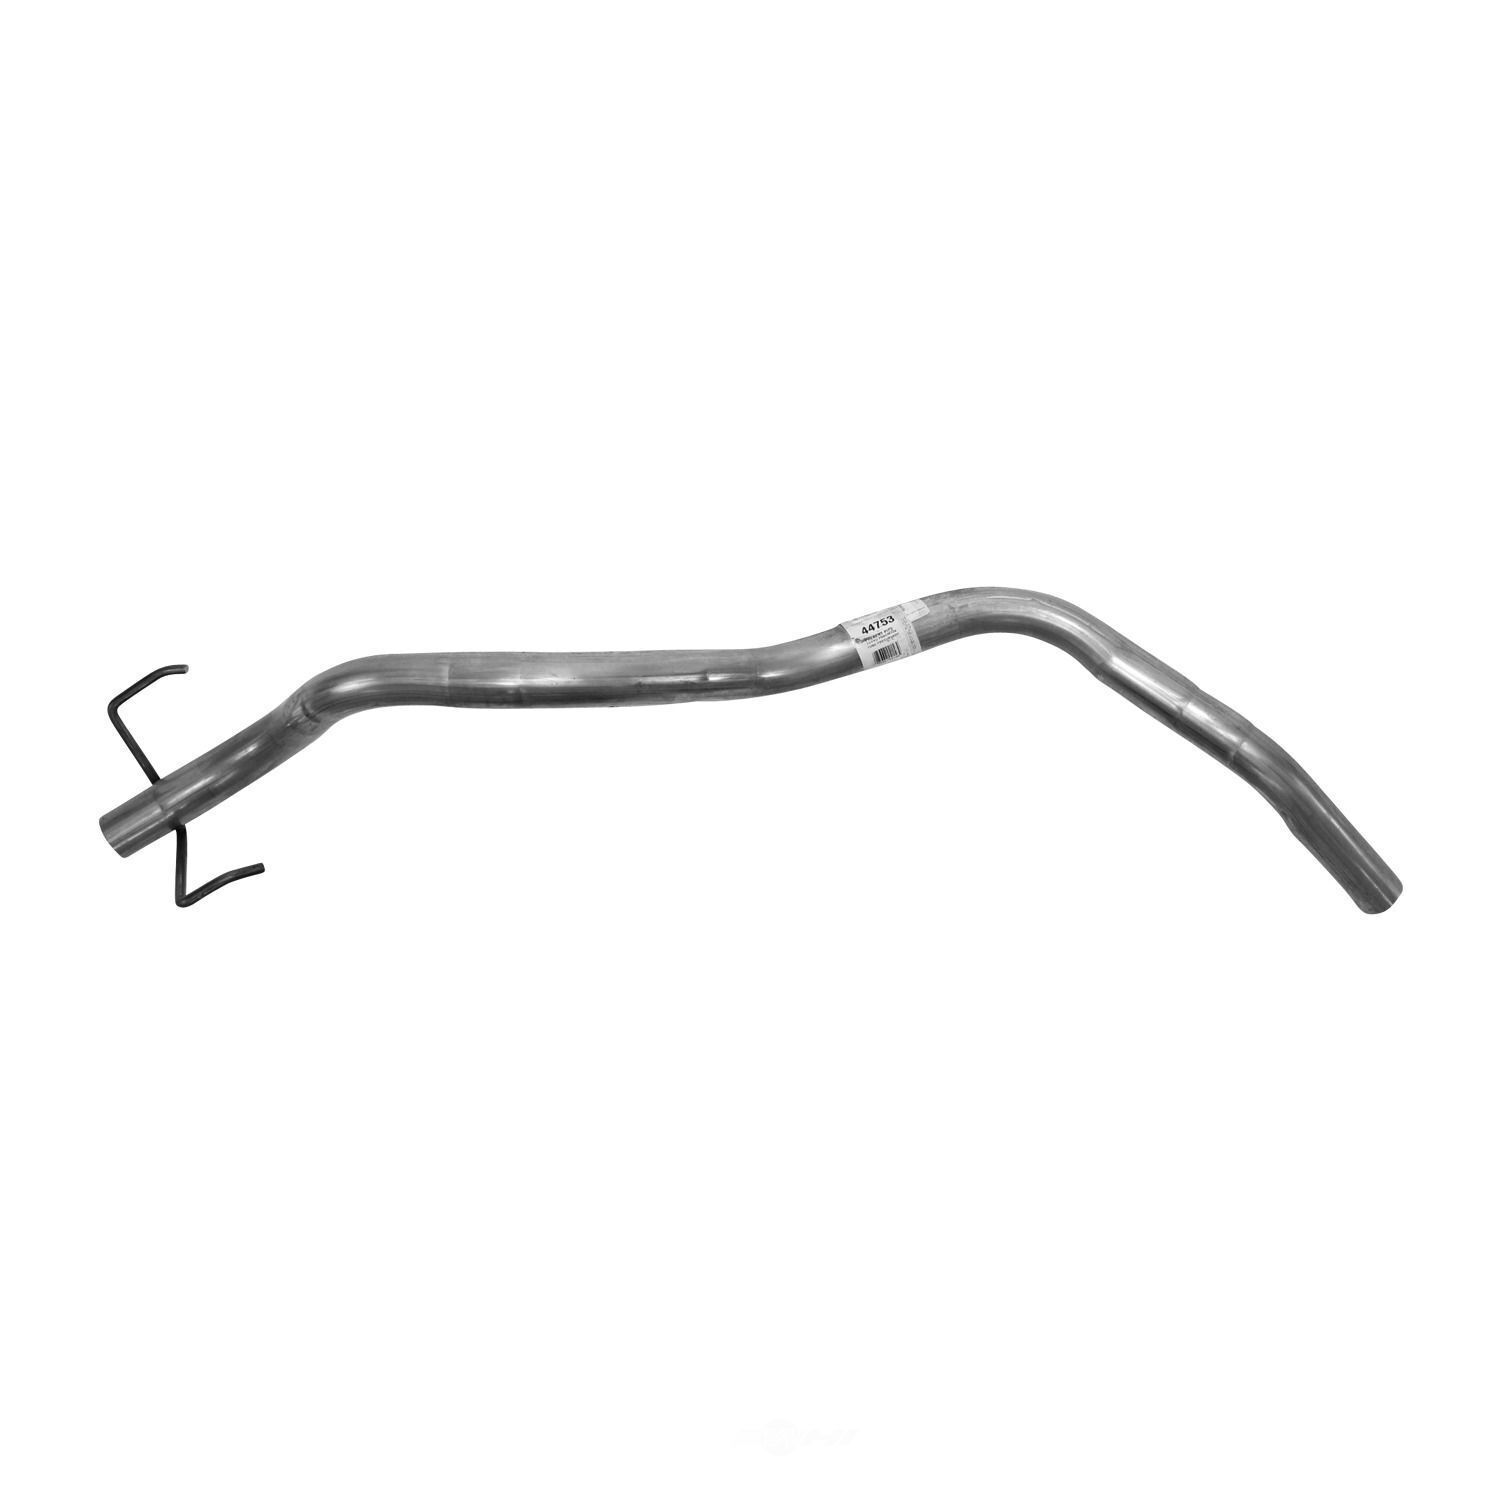 Exhaust Tail Pipe AP Exhaust 44753 fits 84-95 Toyota Pickup 2.4L-L4